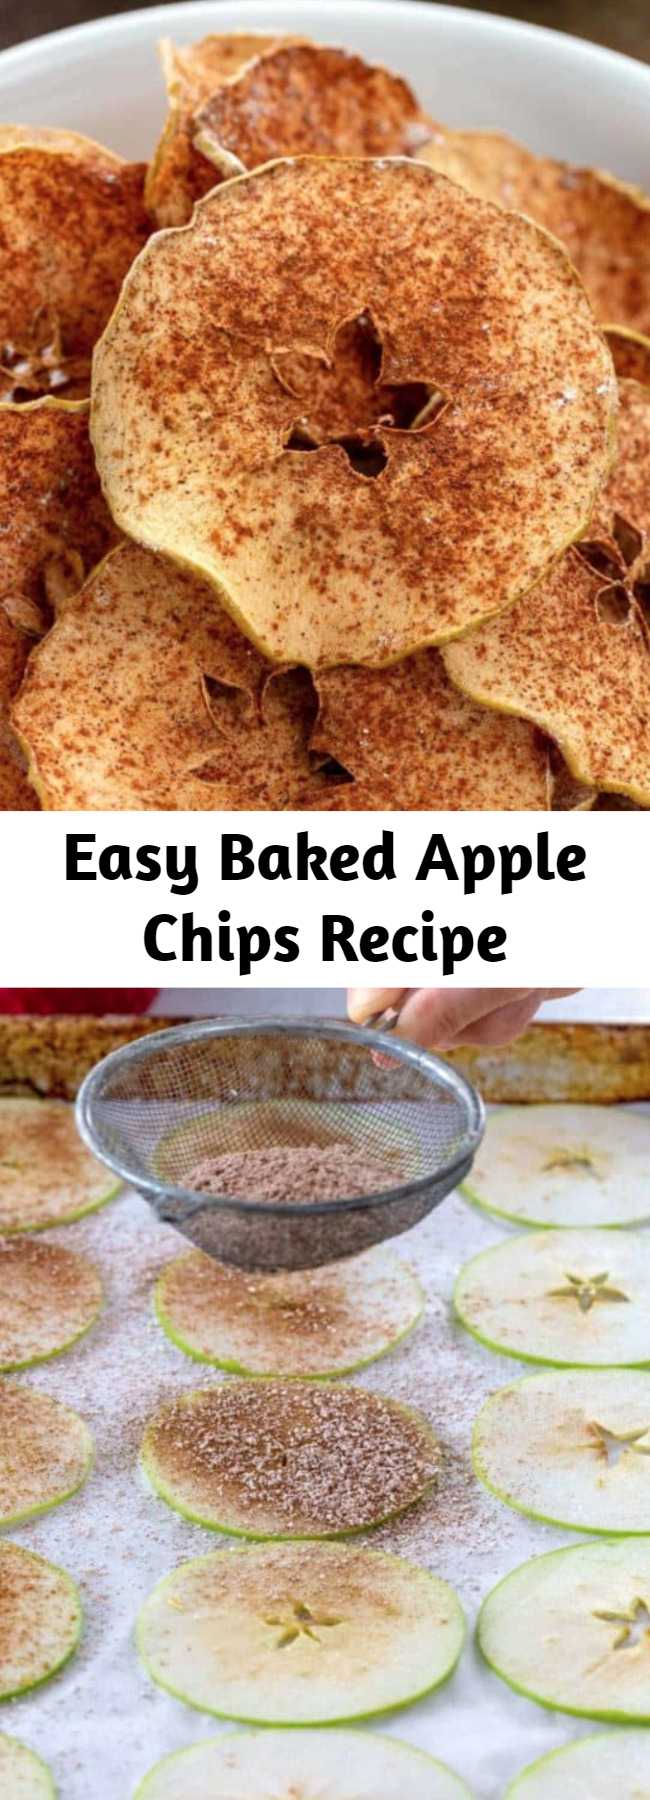 Easy Baked Apple Chips Recipe - Chose your favorite apple variety to make these simple and healthy baked cinnamon apple chips! Cinnamon enhances the flavor while cutting the apples into thin slices, and baking at a low oven temperature for a few hours ensures super crispy chips. These crisp apple chips are delicious and addicting, without the guilt!